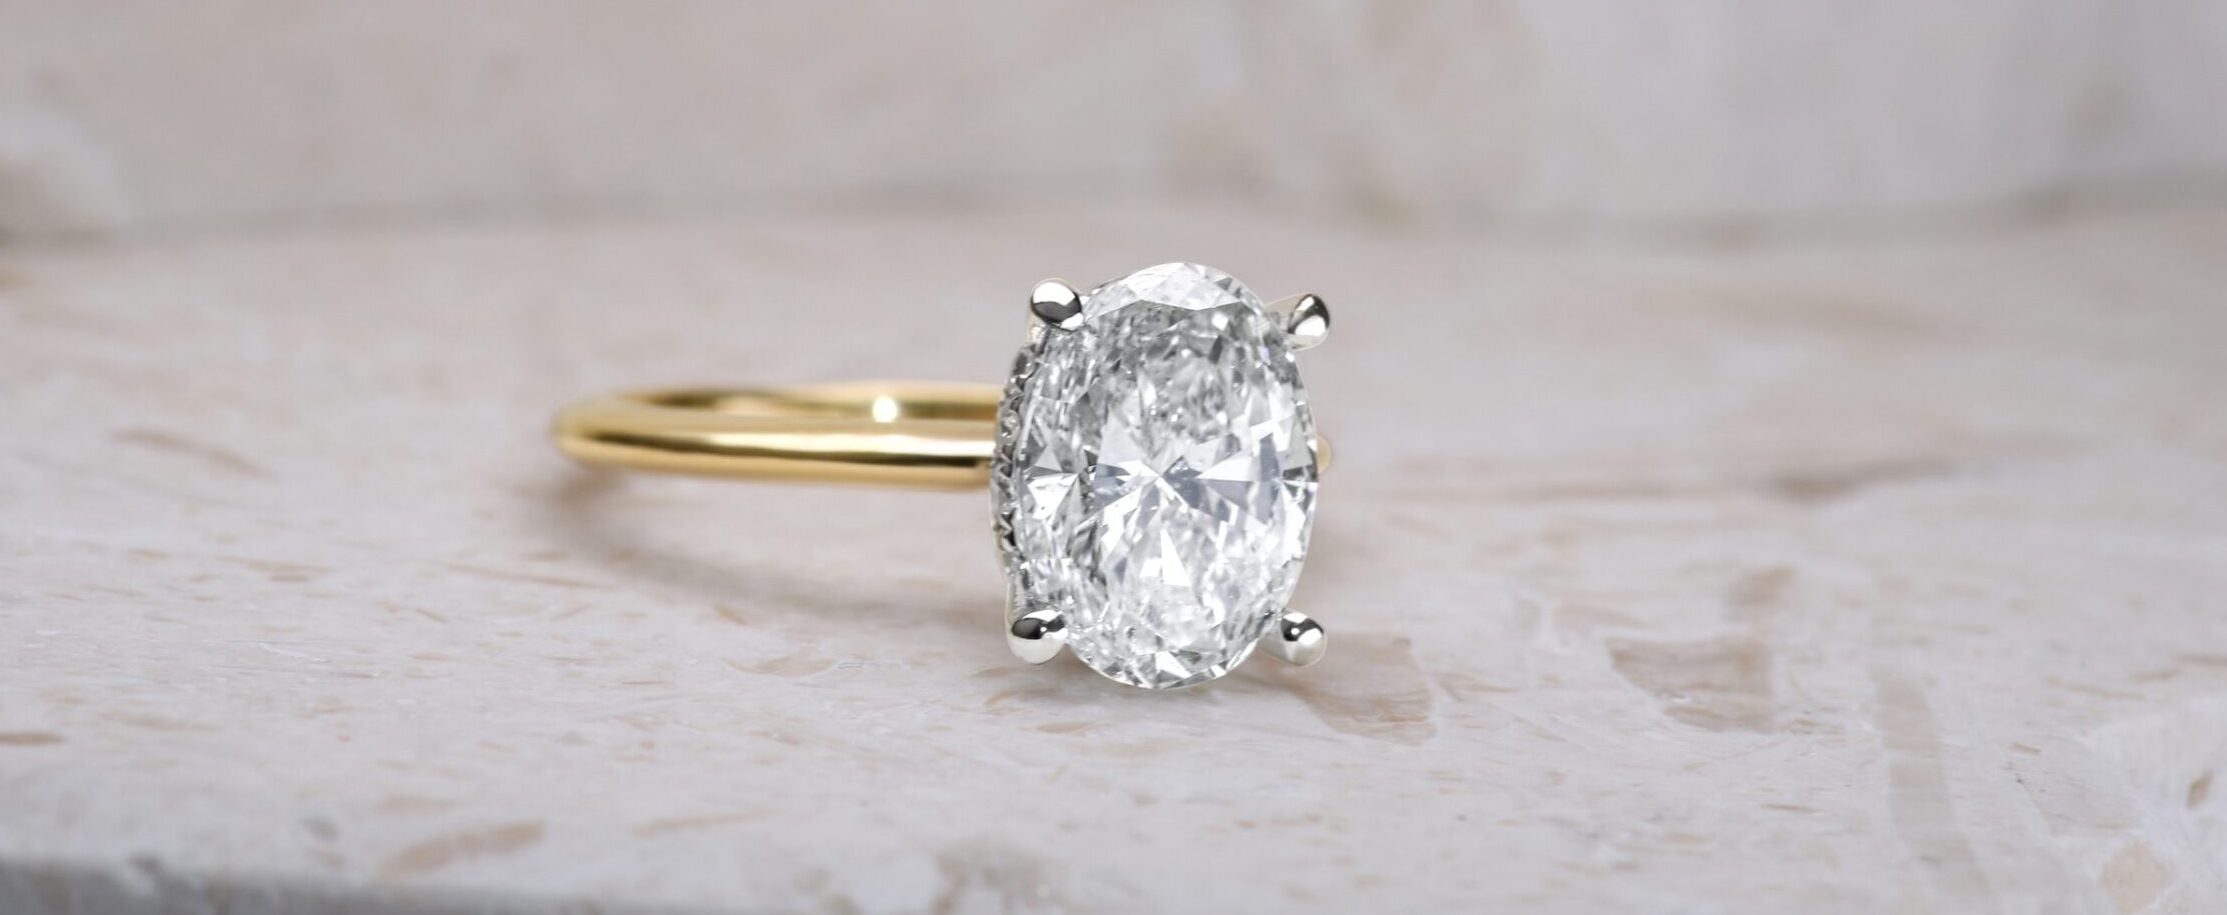 Oval Engagement Rings: What Jewelers WON'T Tell You about these diamond rings!